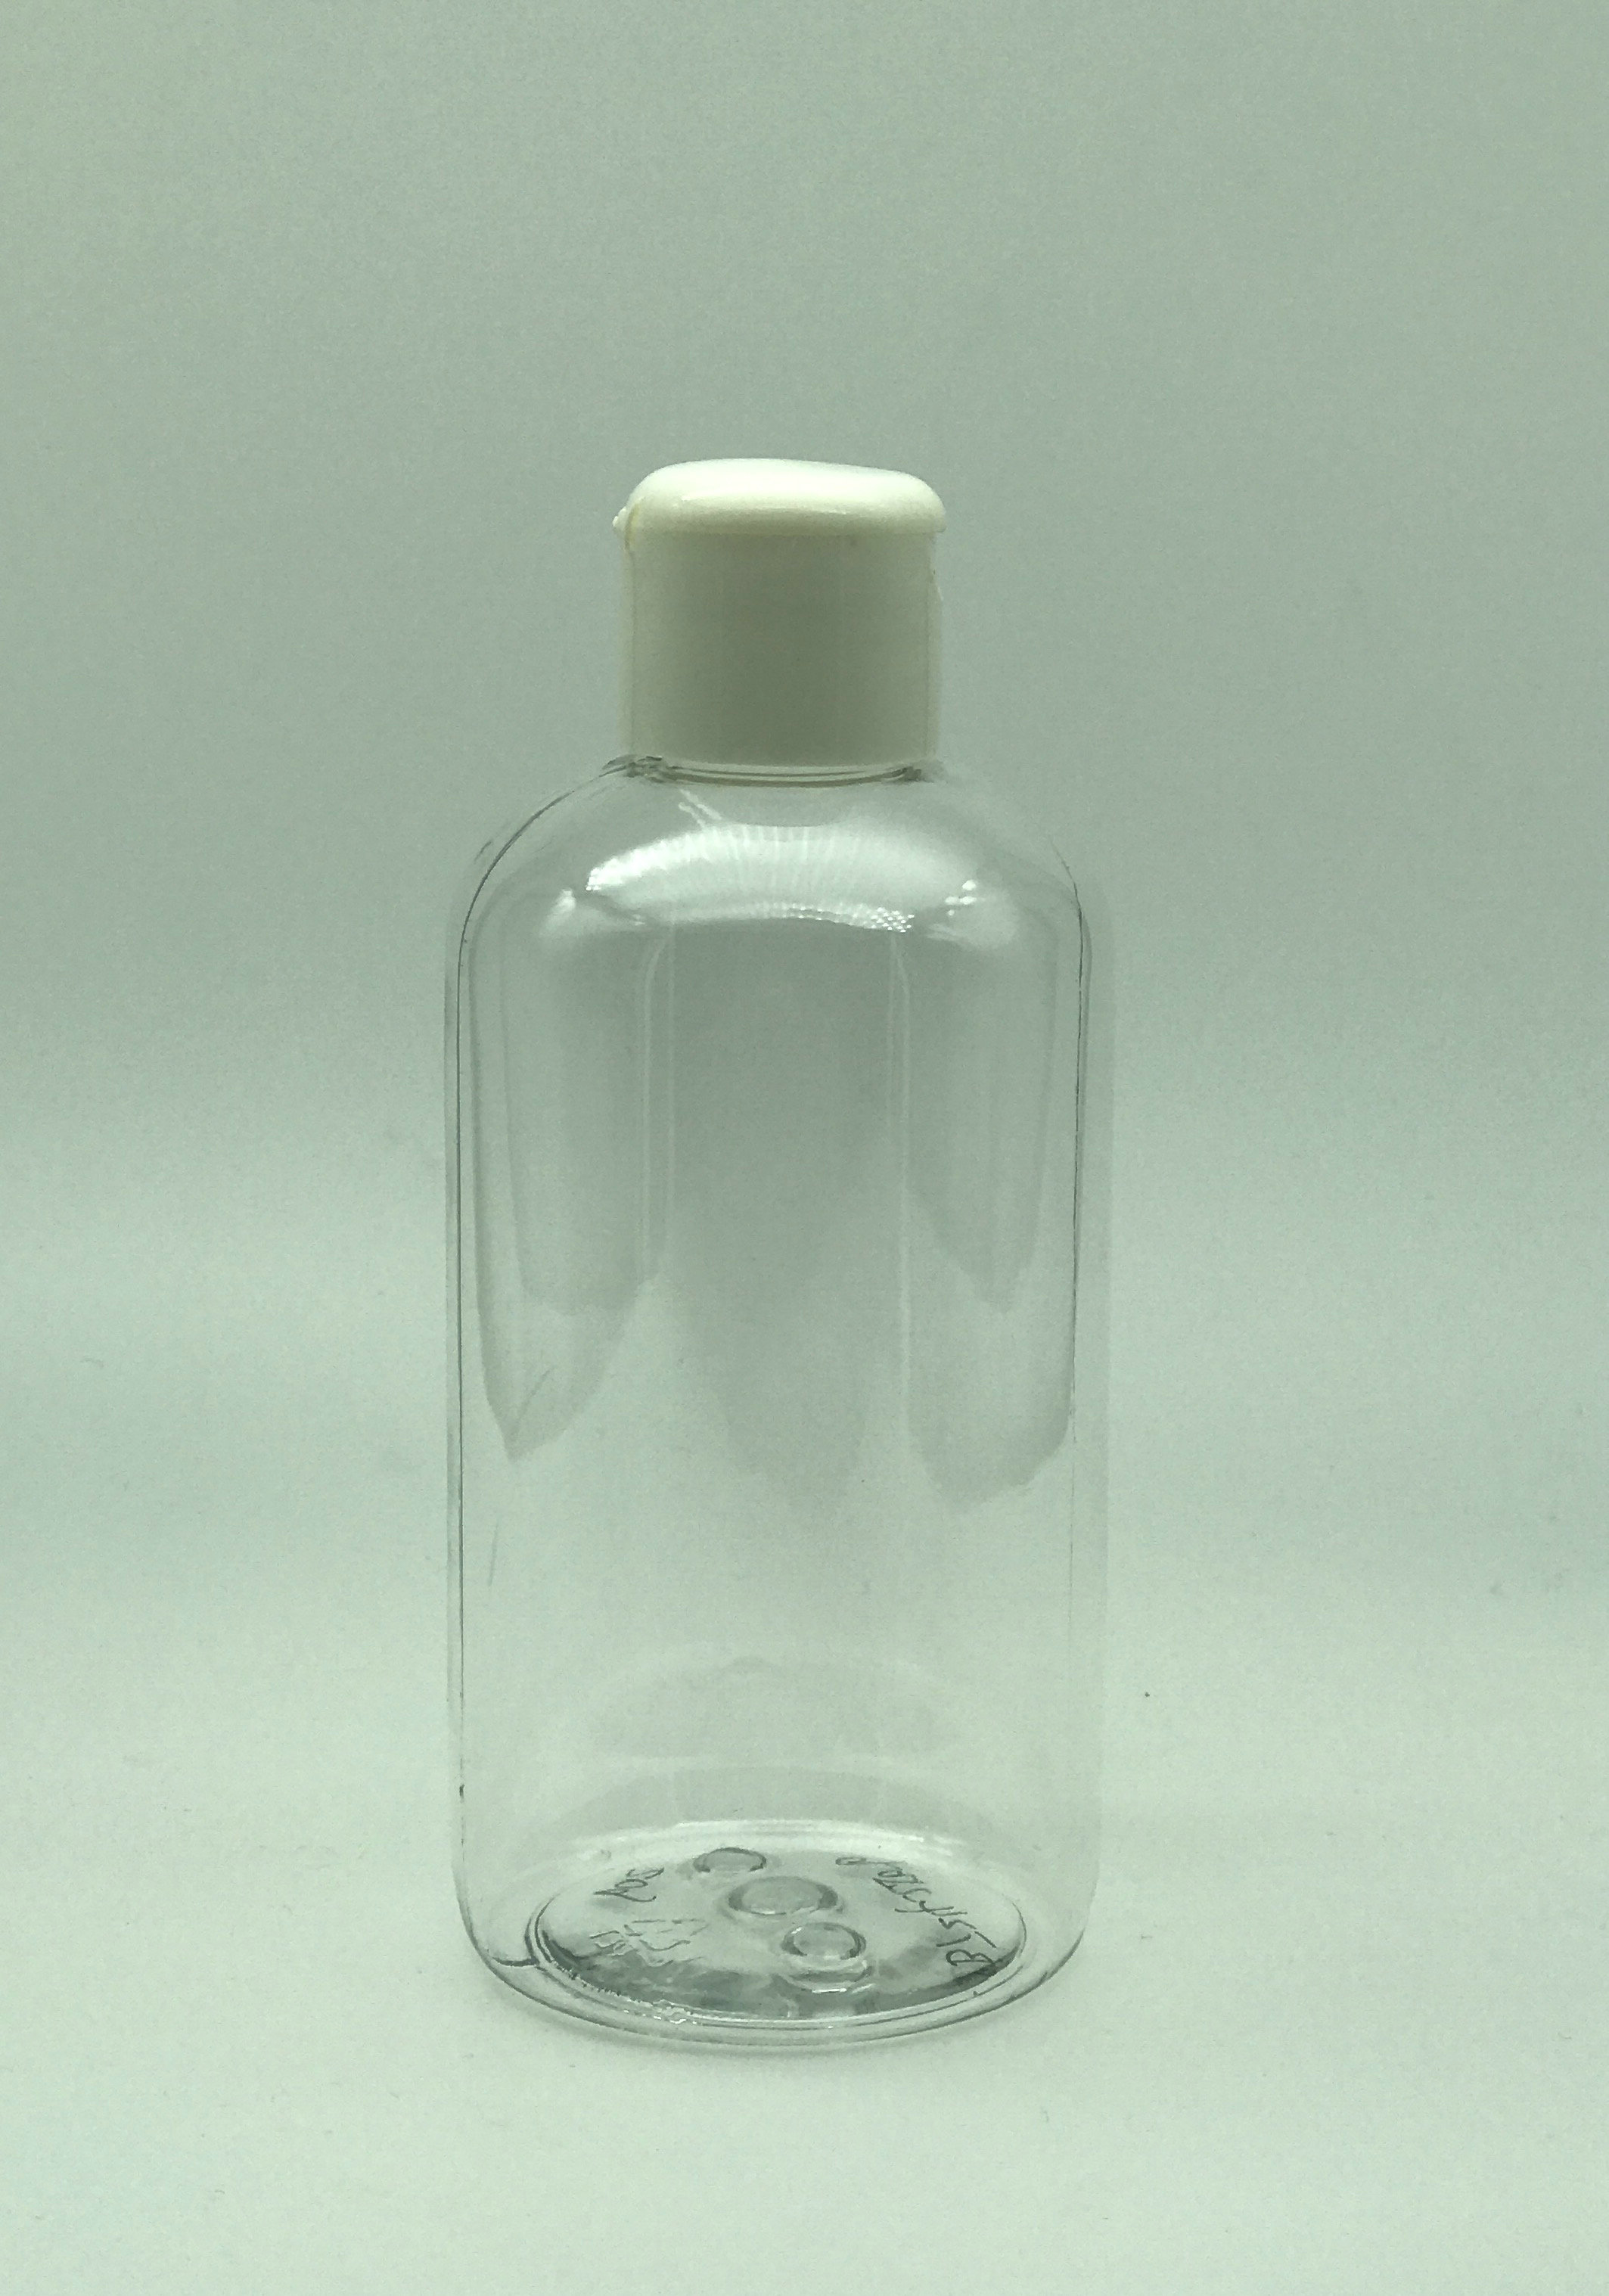 BT24-250-6, 250ml, 8.33oz round clear hand antibacterial gel and sanitizer PET bottle with white flip cap